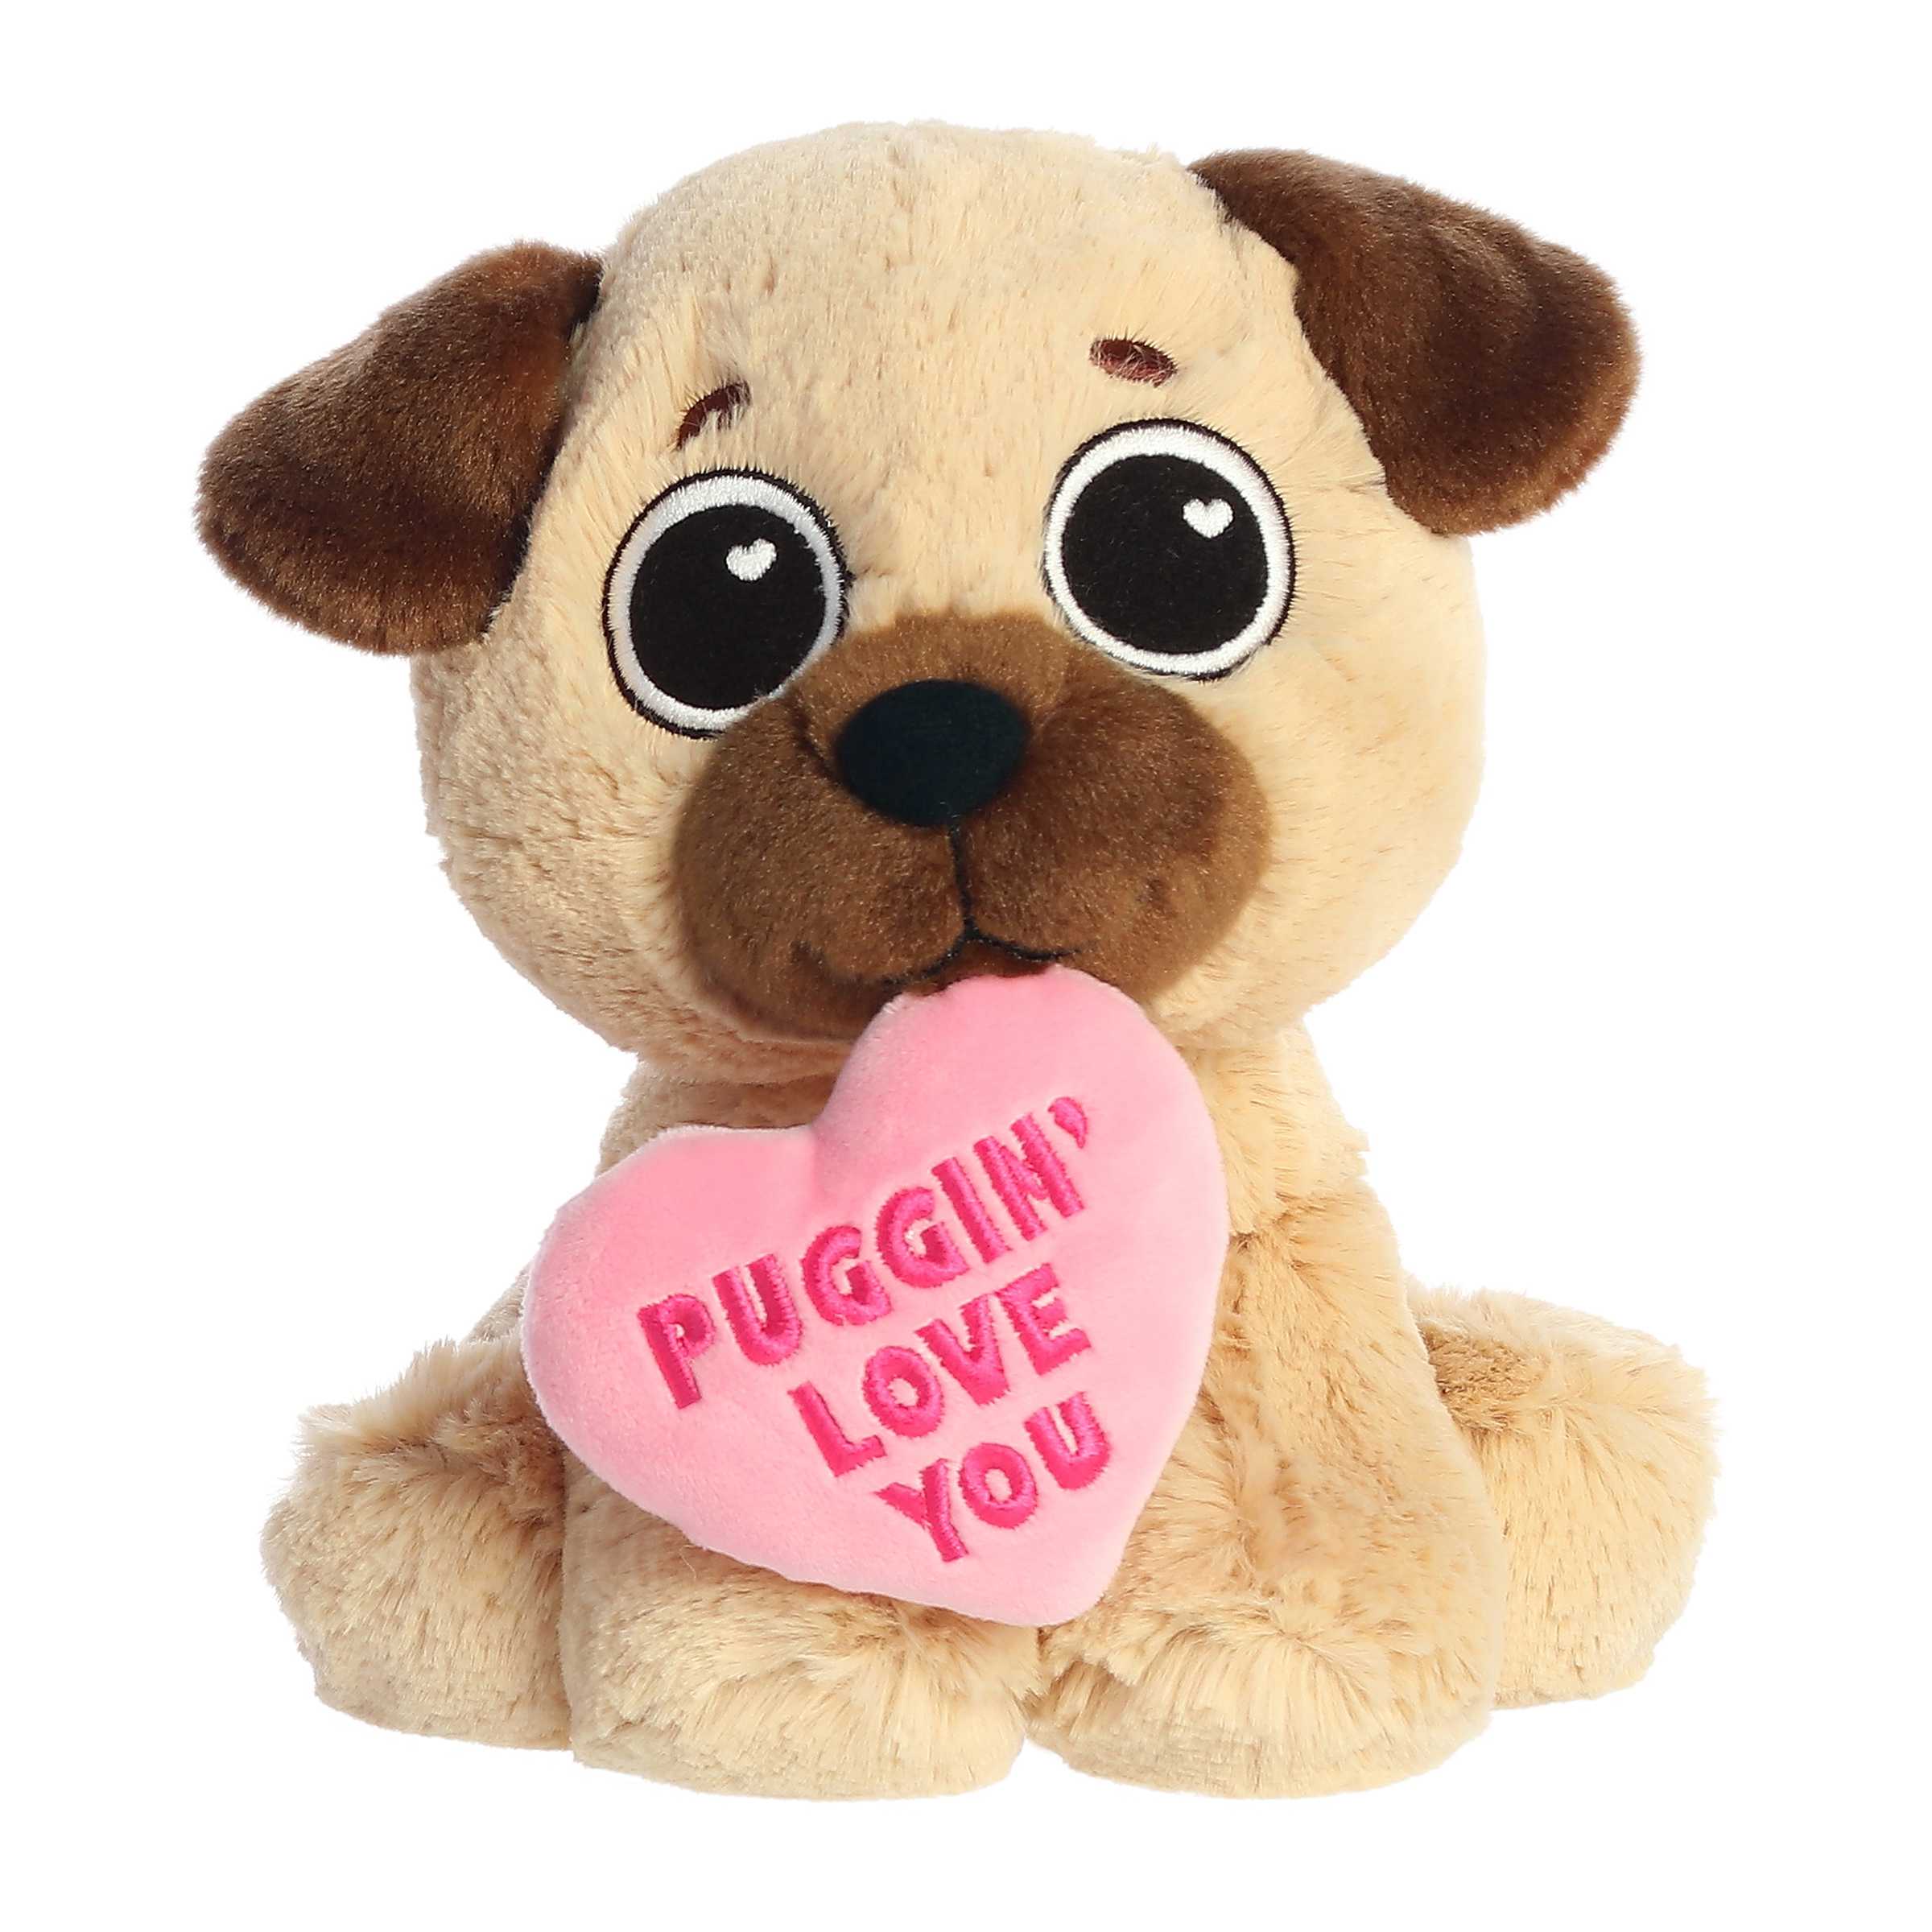 Adorable pug plush toy with a tan and brown body, holds a pink heart on its mouth with "Puggin' Love You" pun written across